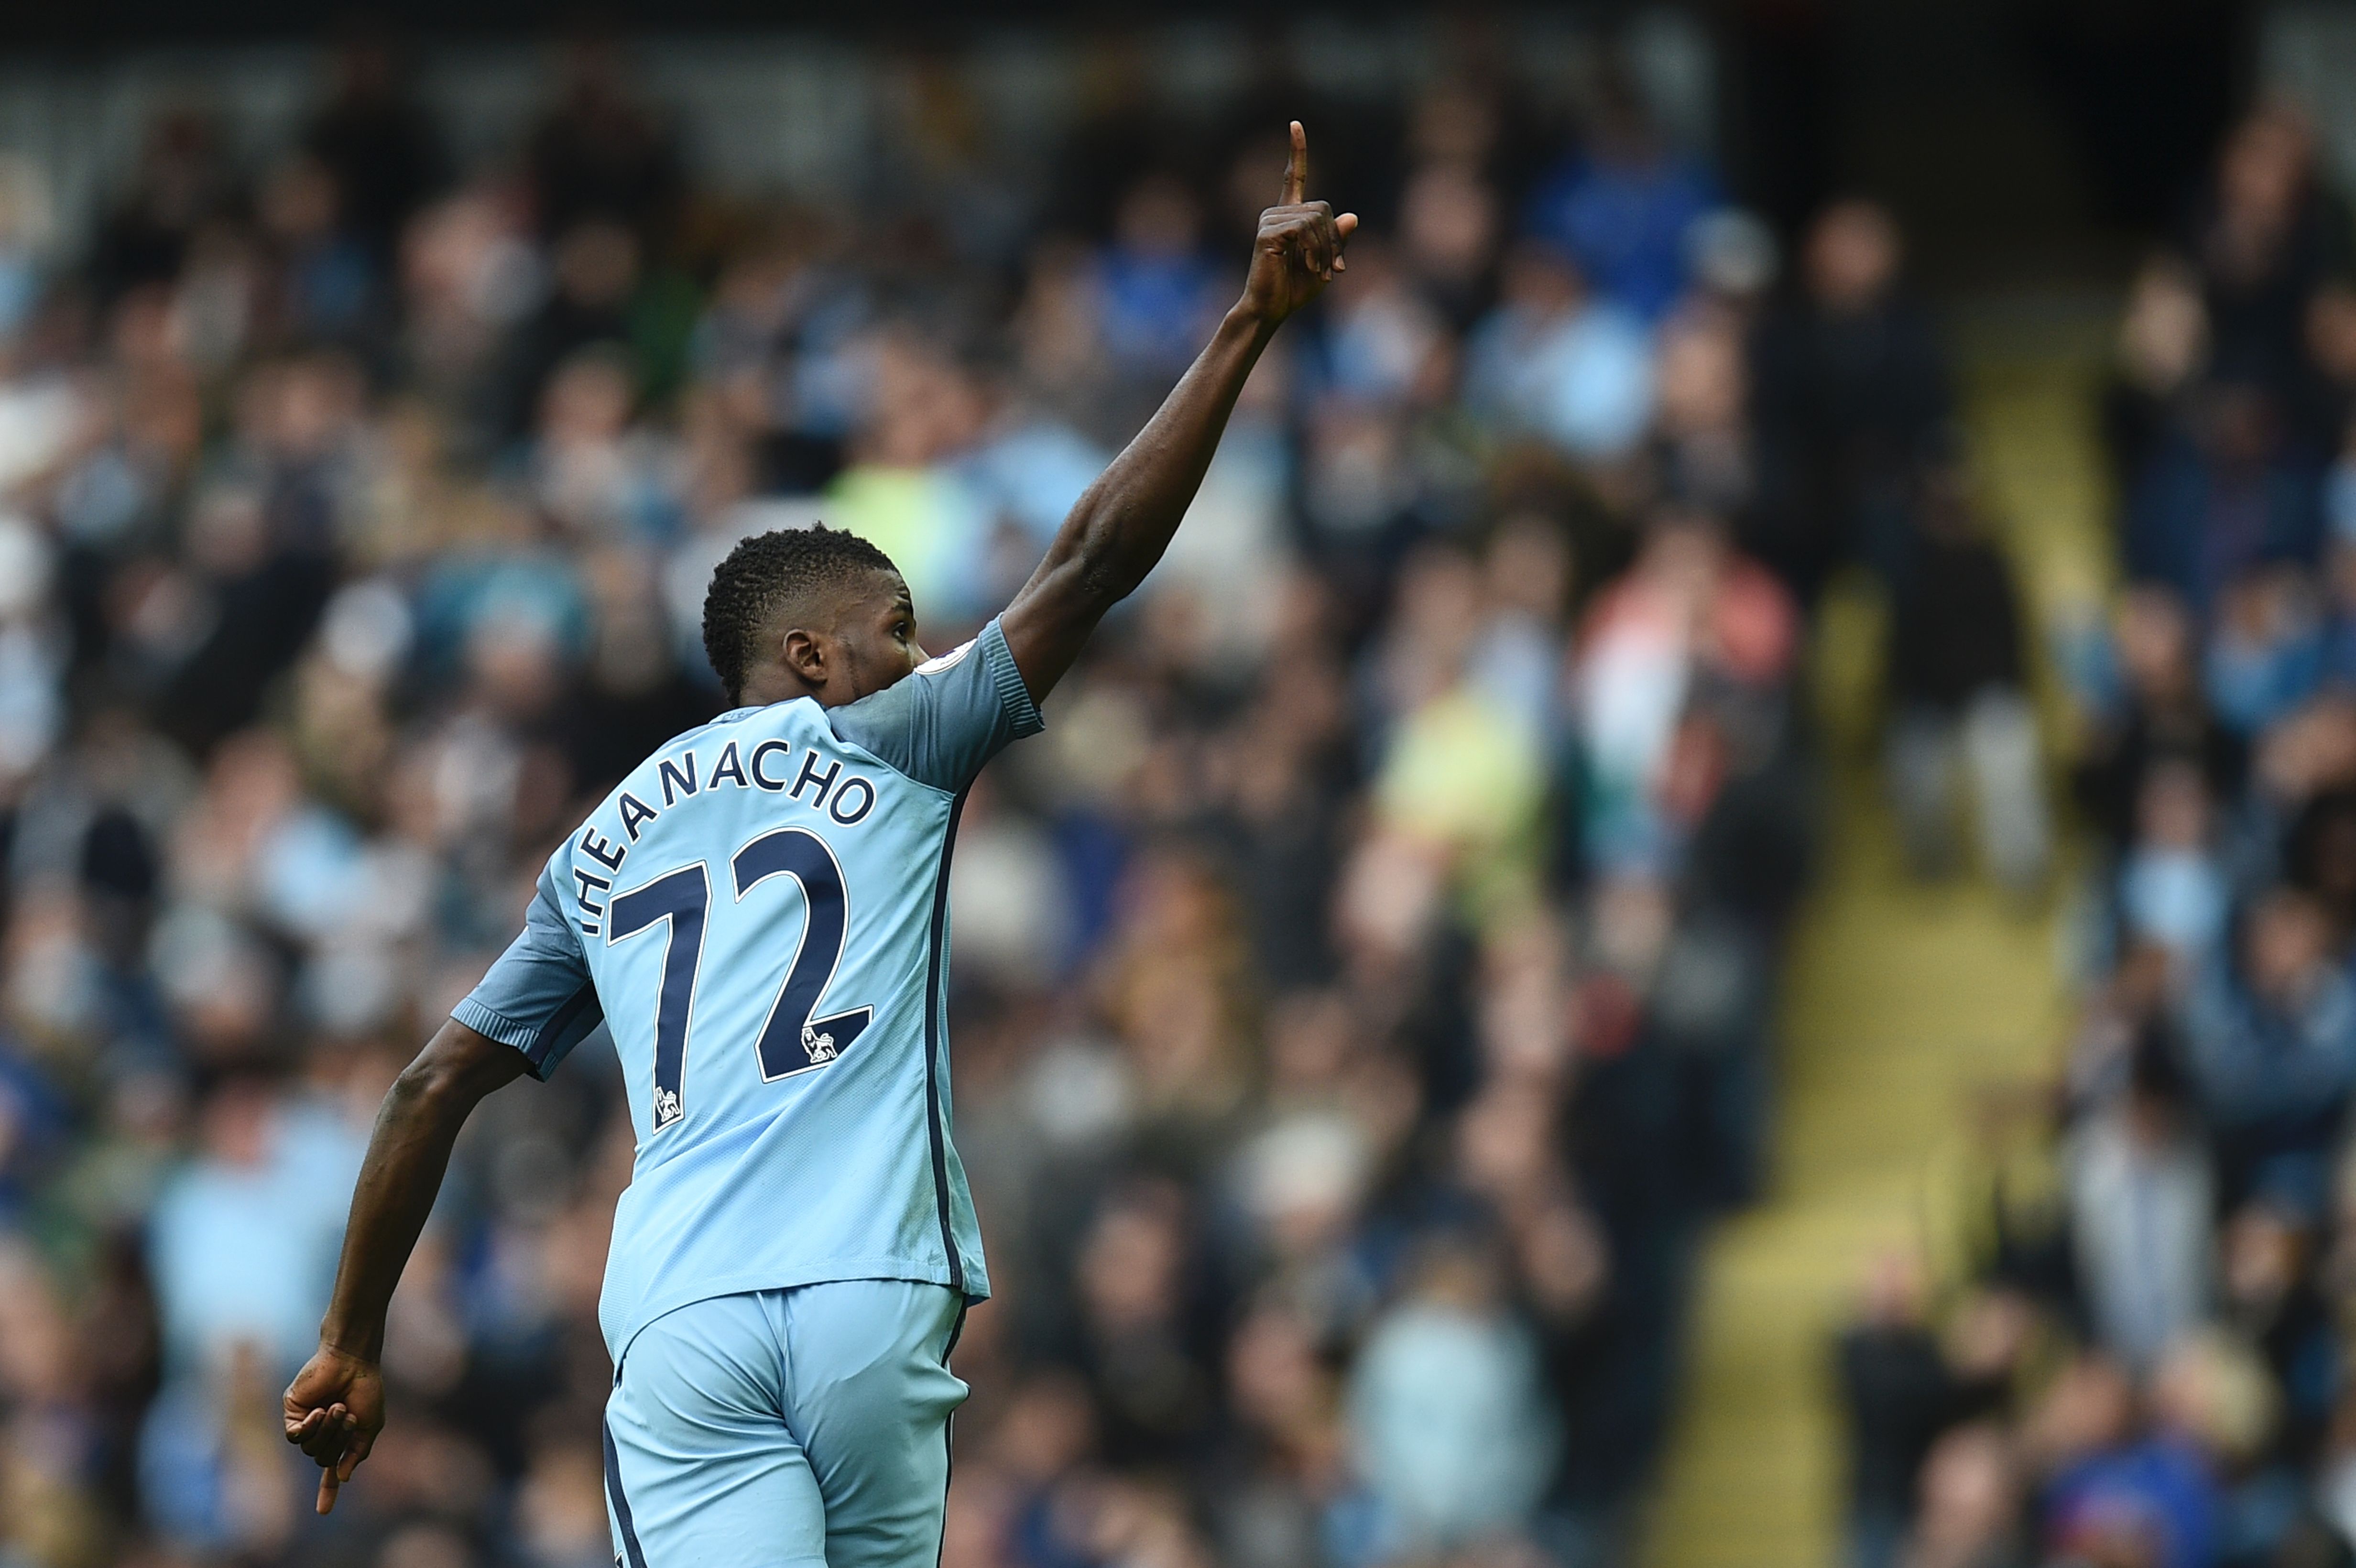 Manchester City's forgotten man Kelechi Iheanacho scored the vital equaliser for his side in the reverse fixture. (Photo courtesy - Oli Scarff/AFP/Getty Images)